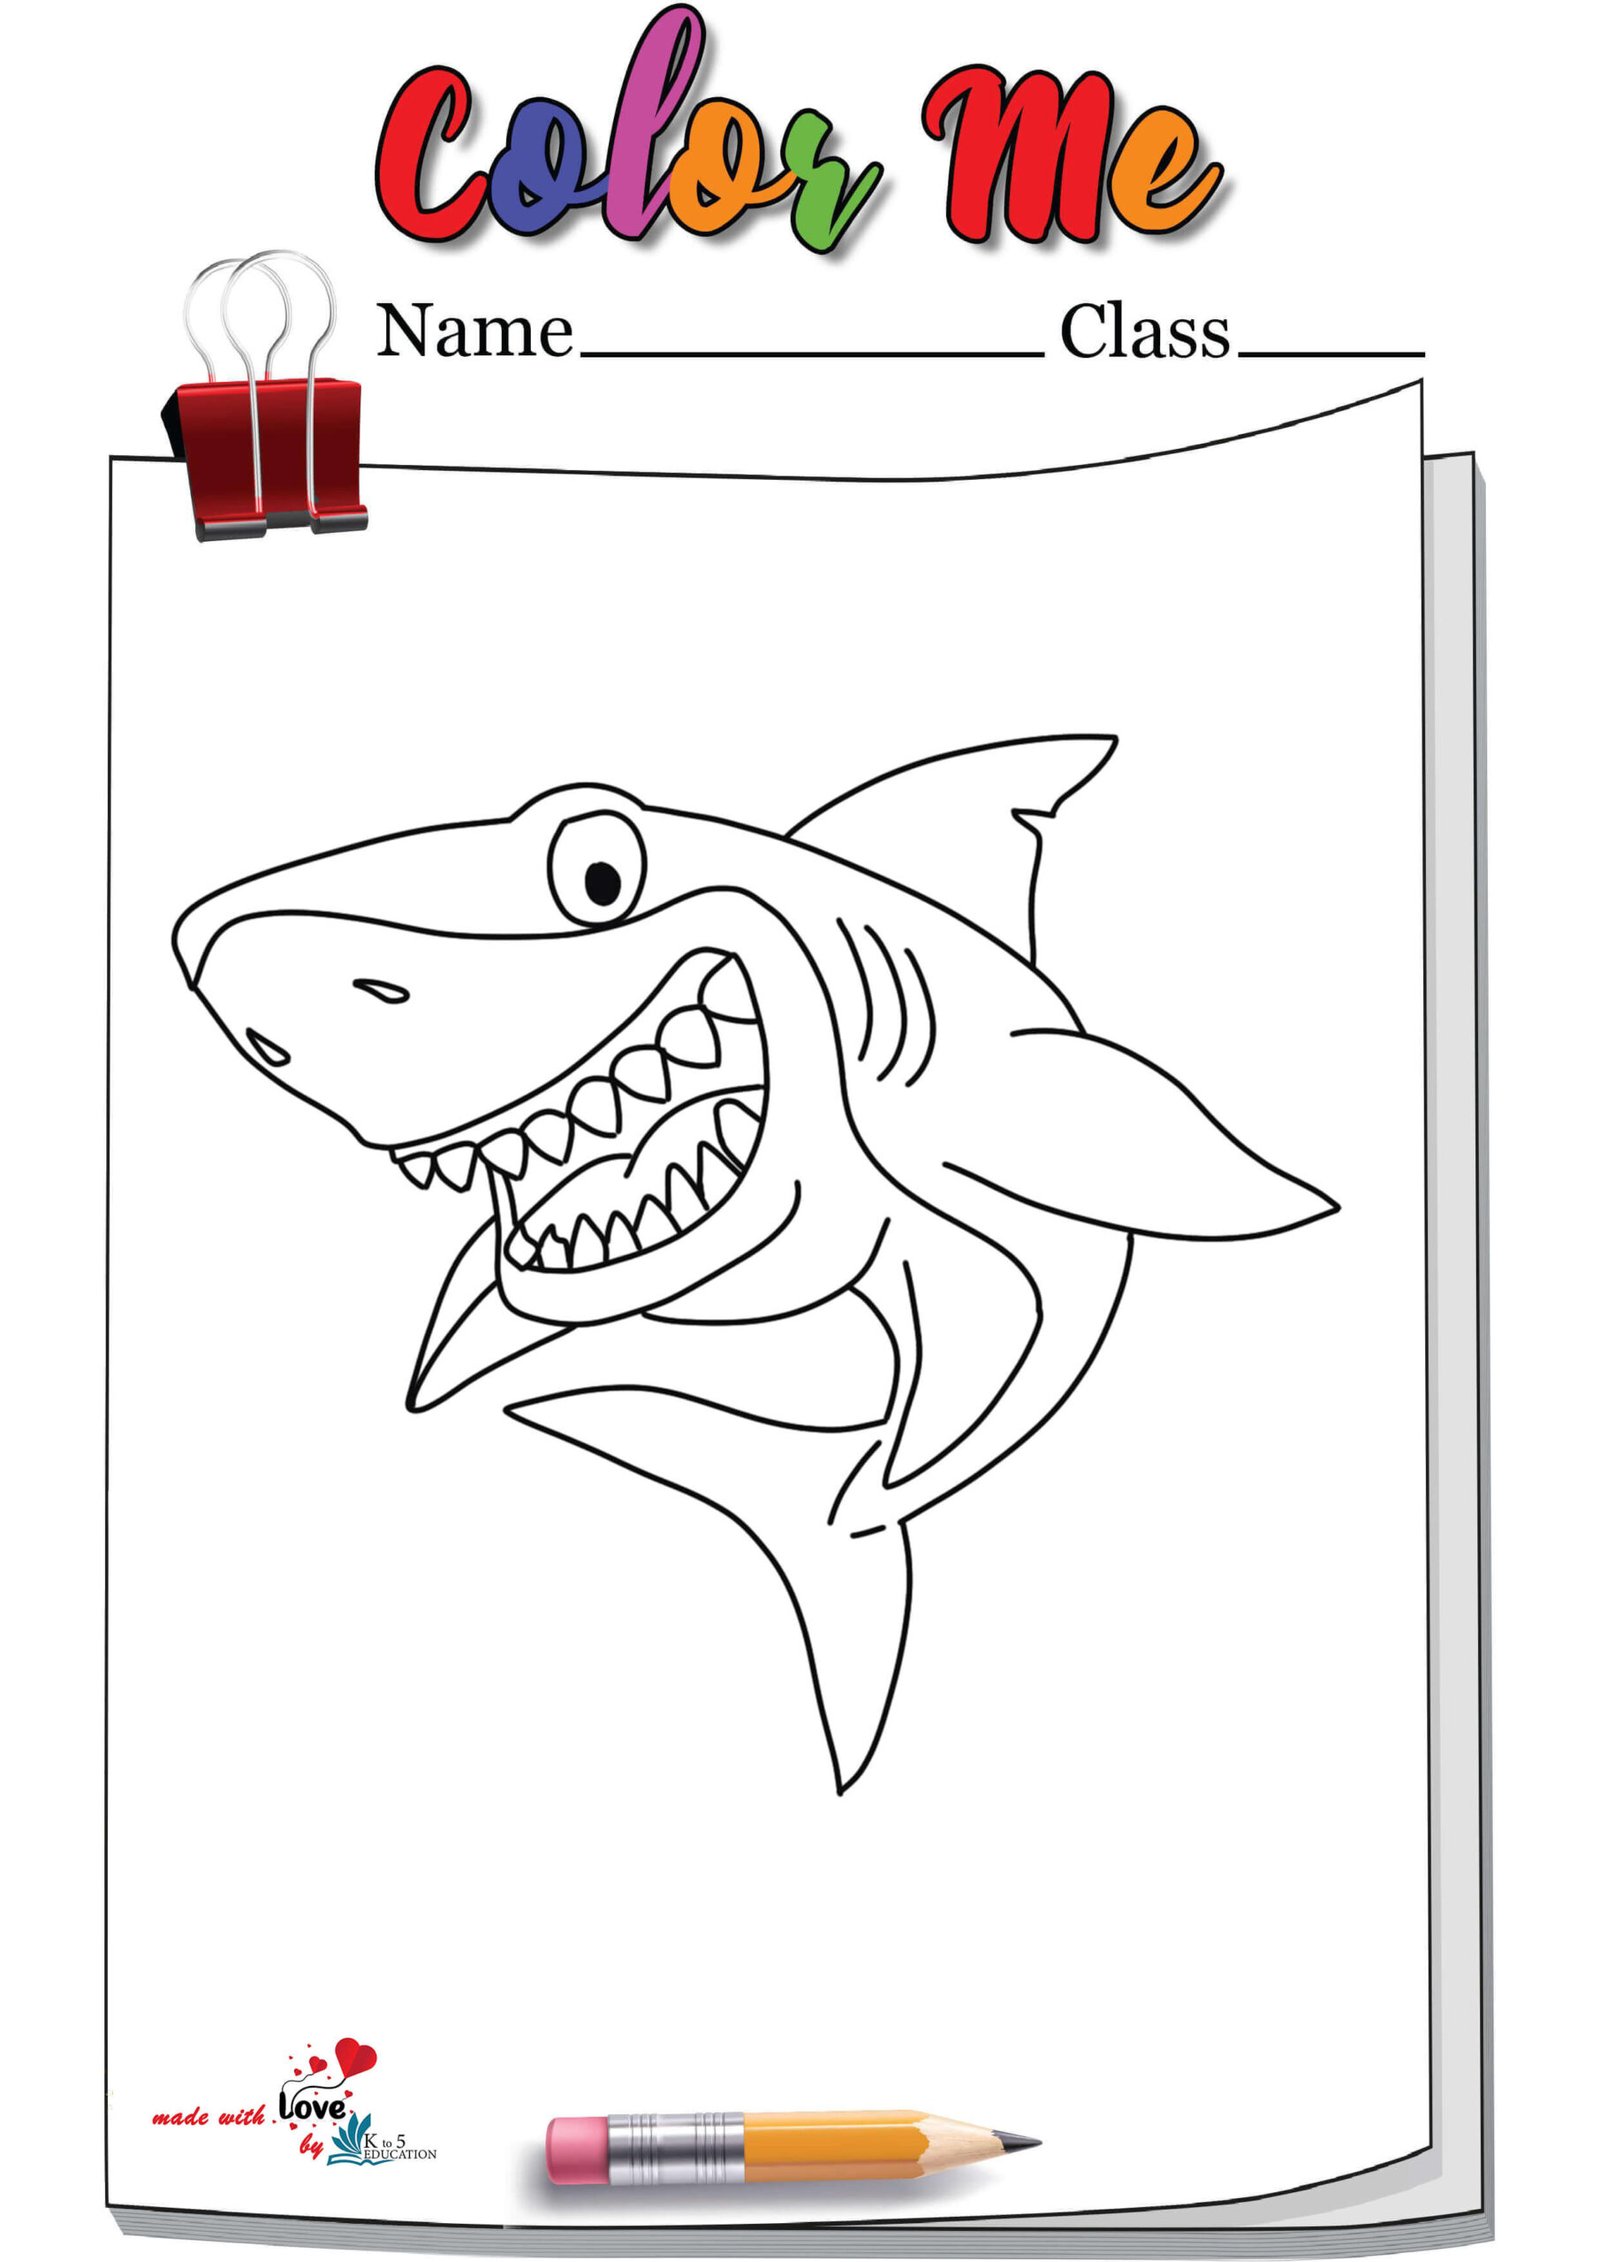 Shark Coloring Pages For Adults